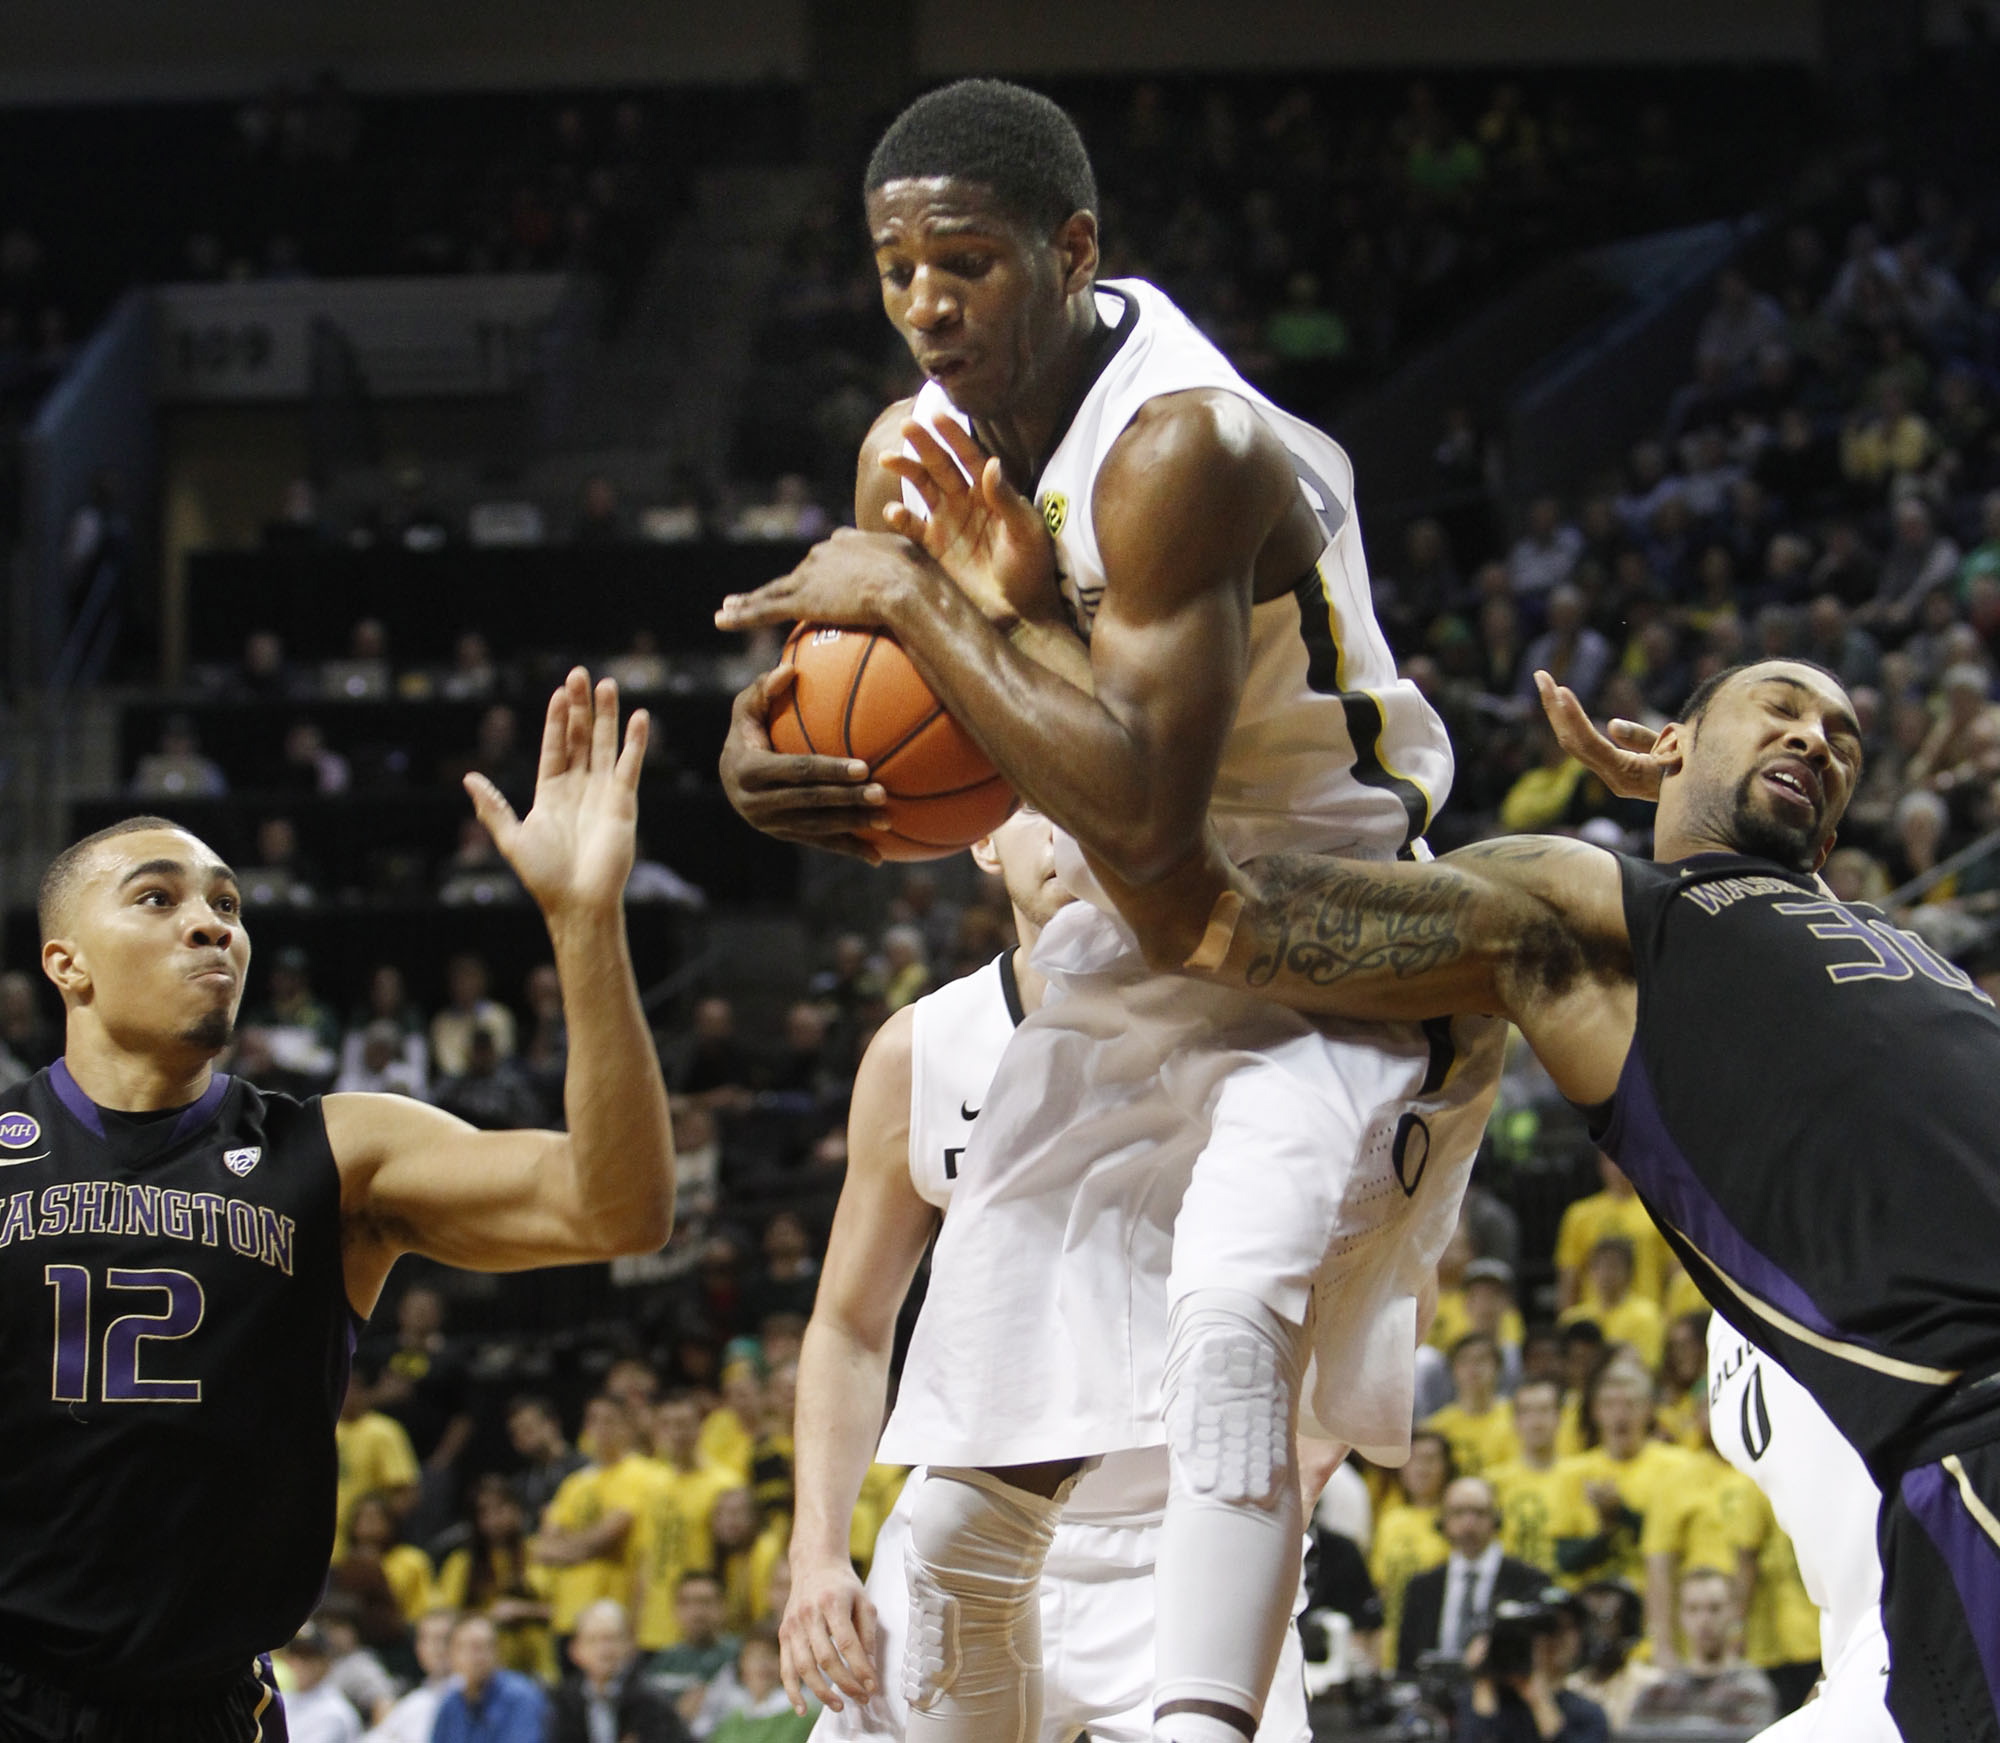 Oregon's Damyean Dotson, center, comes down with a rebound against Washington's Andrew Andrews, left, and Desmond Simmons during the second half an NCAA college basketball game in Eugene, Ore., on Wednesday, Feb. 19, 2014. Oregon won 78-71.